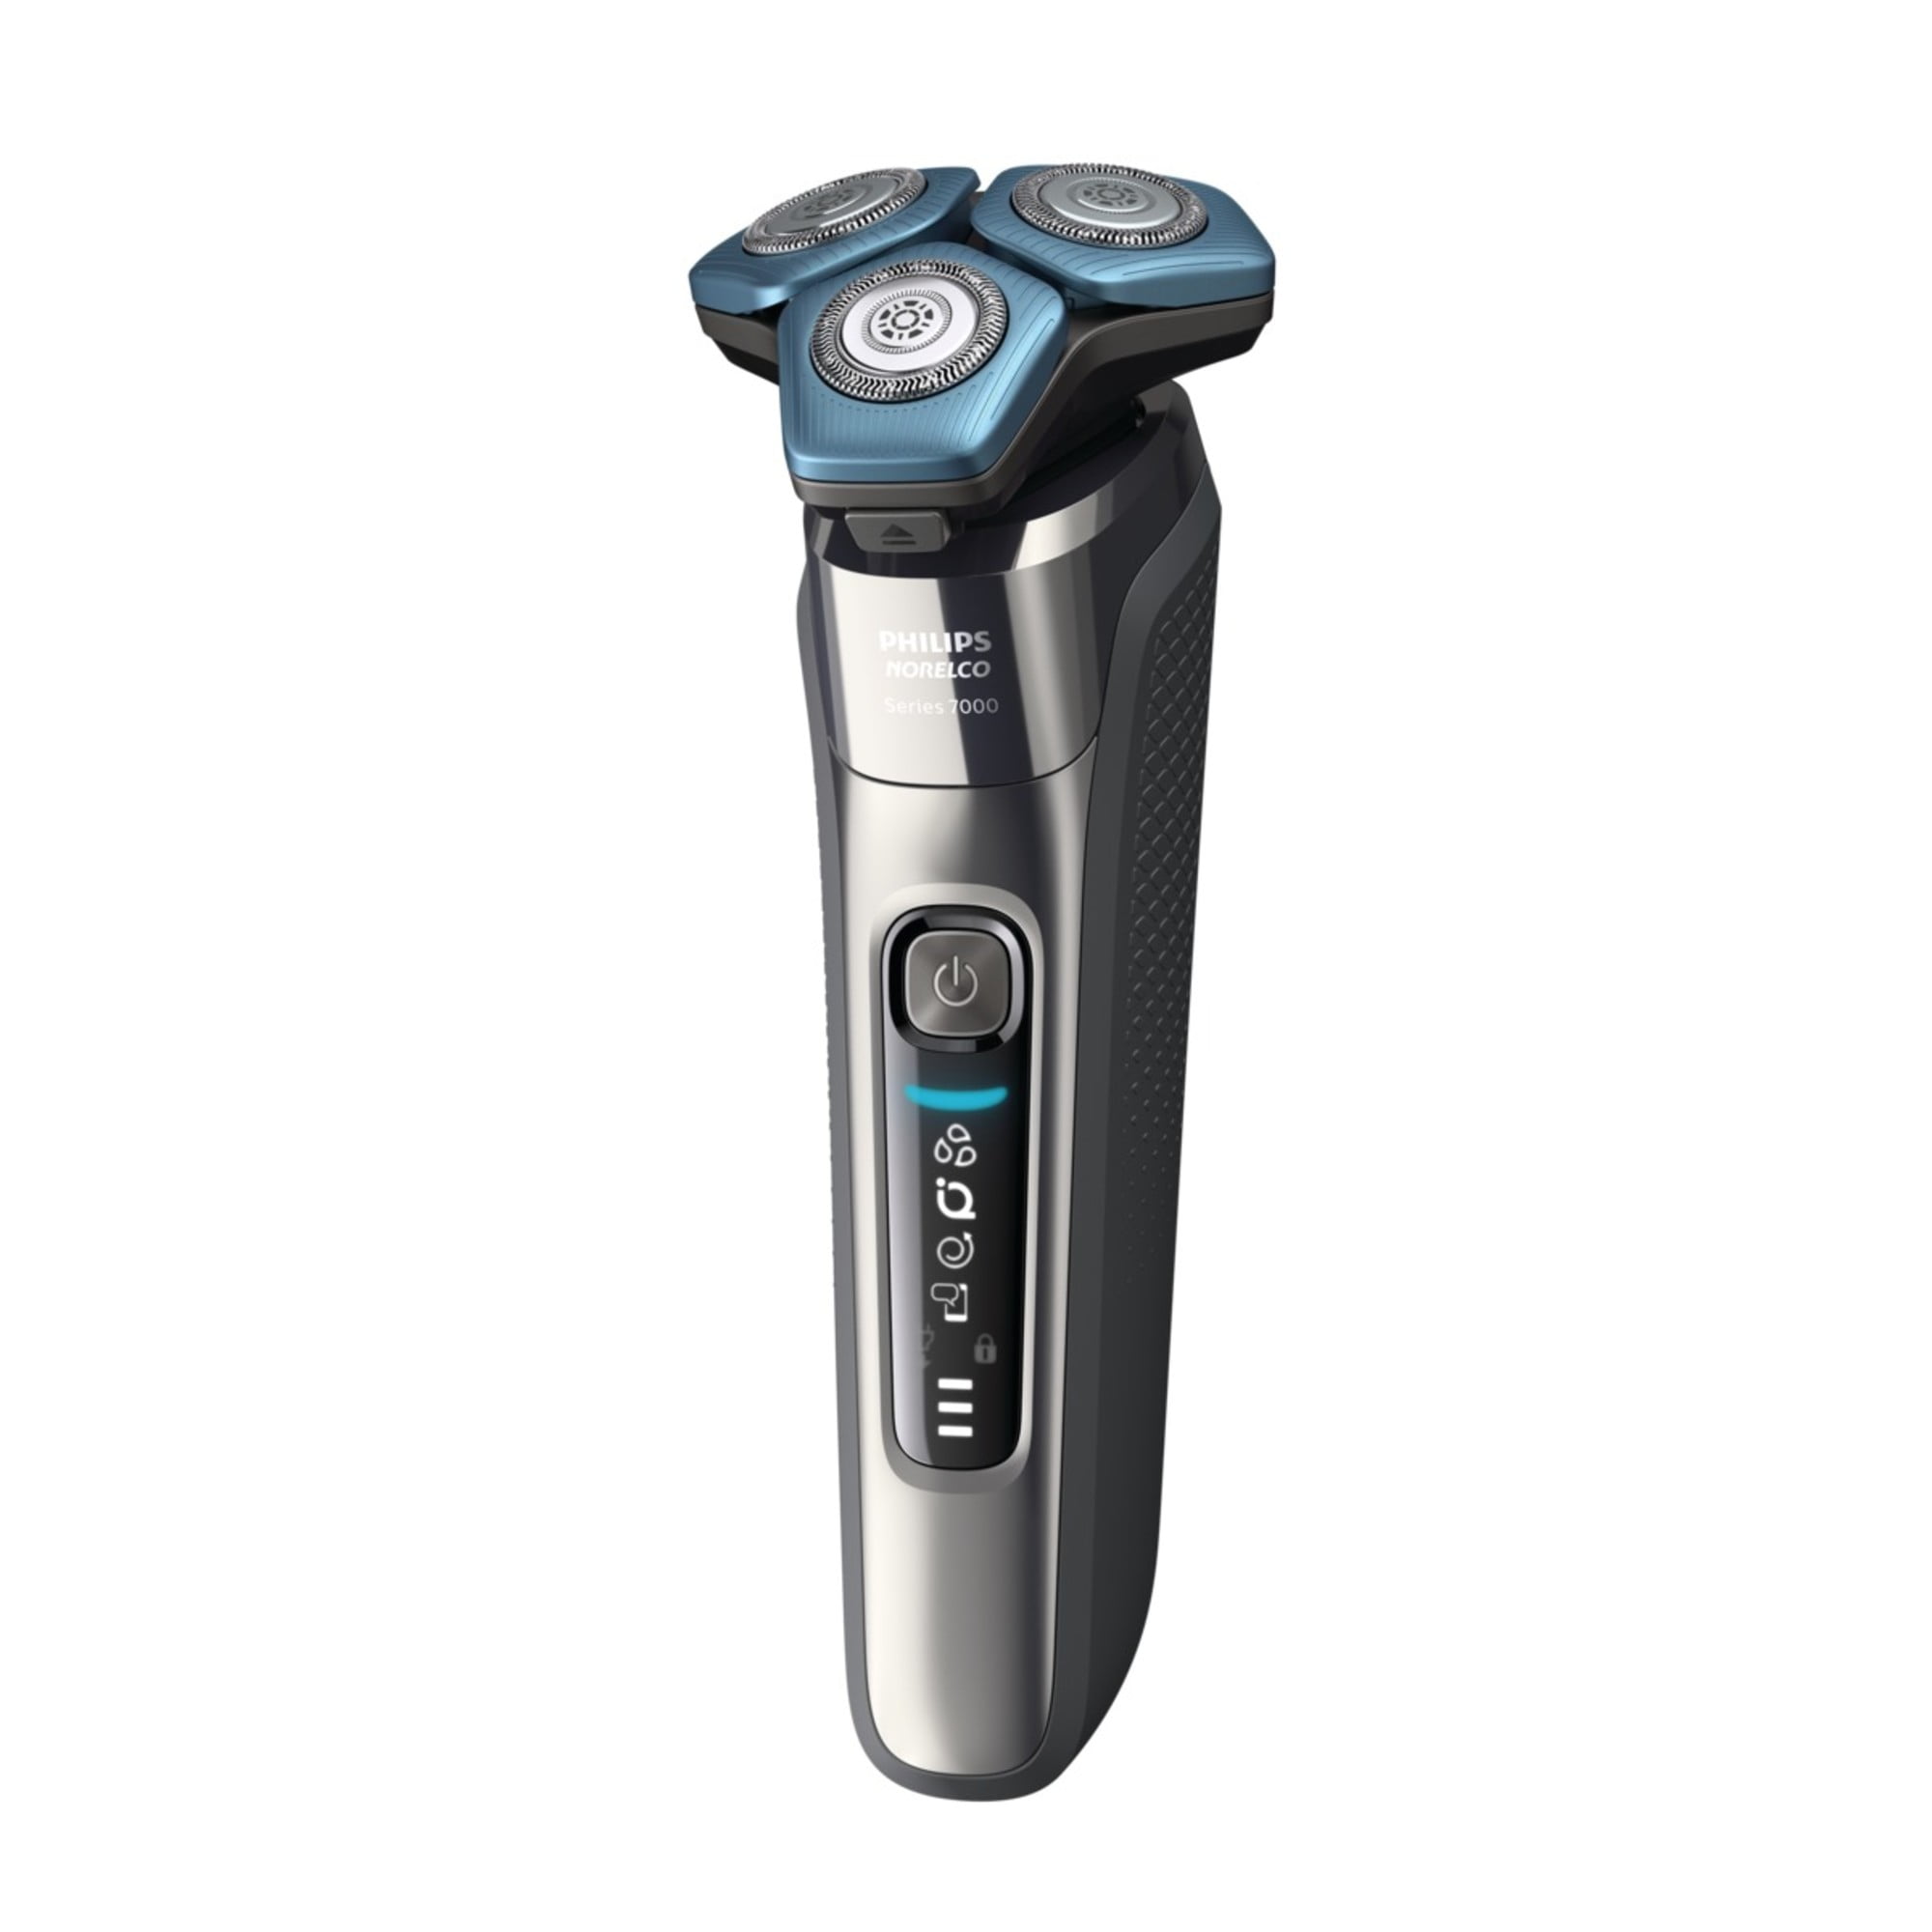 Philips Norelco 6100 Review: A Shaver with Decent Performance and Price